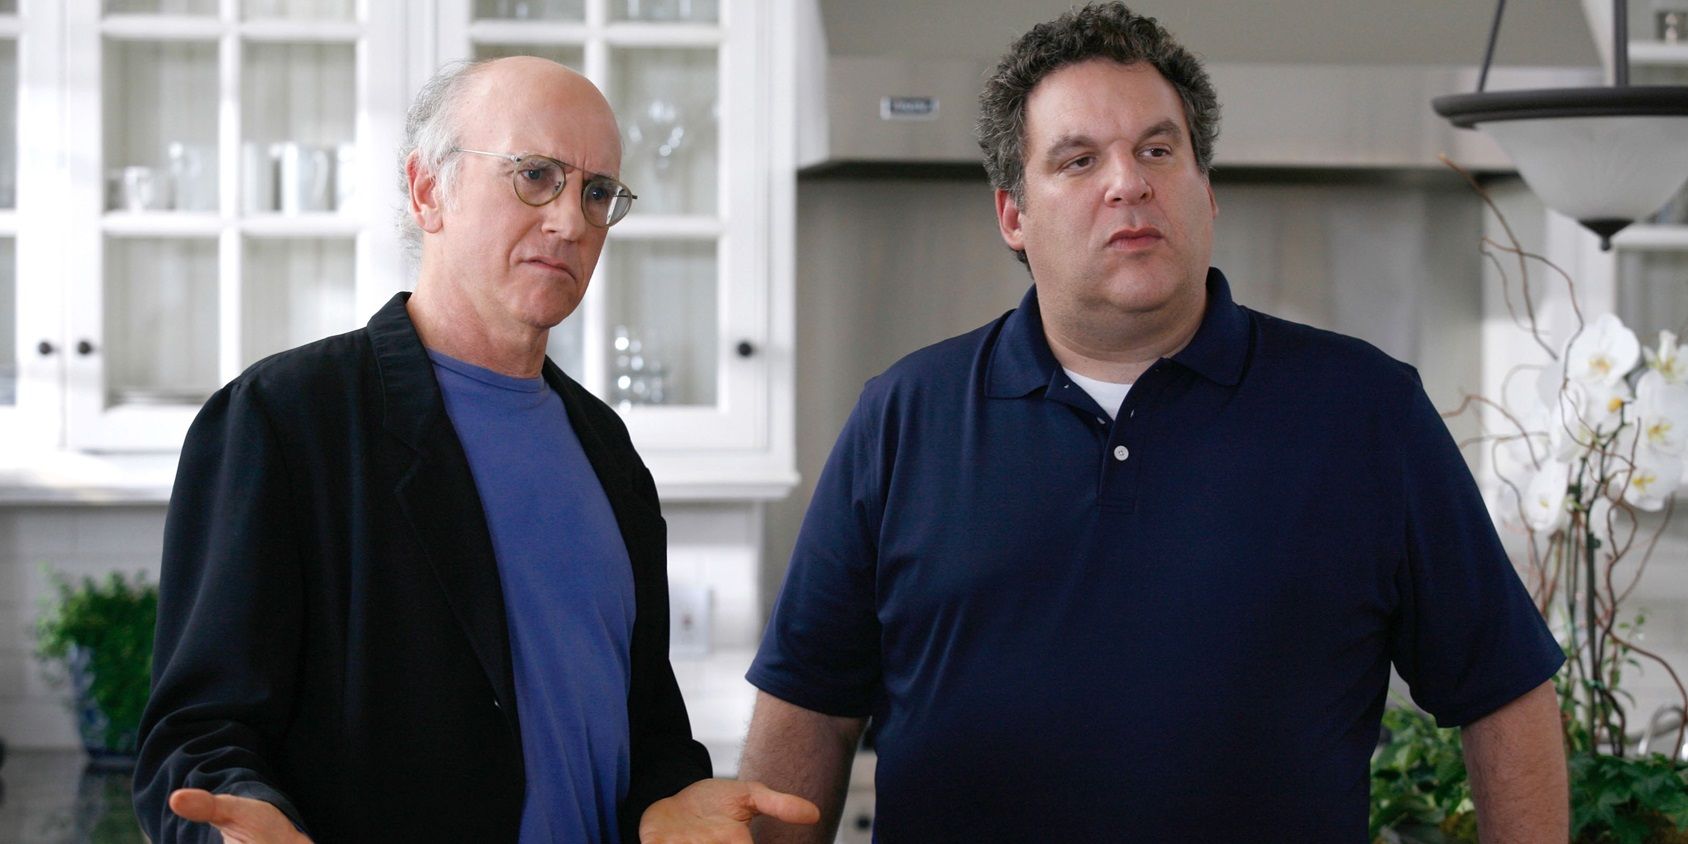 Larry and Jeff in the kitchen in Curb Your Enthusiasm